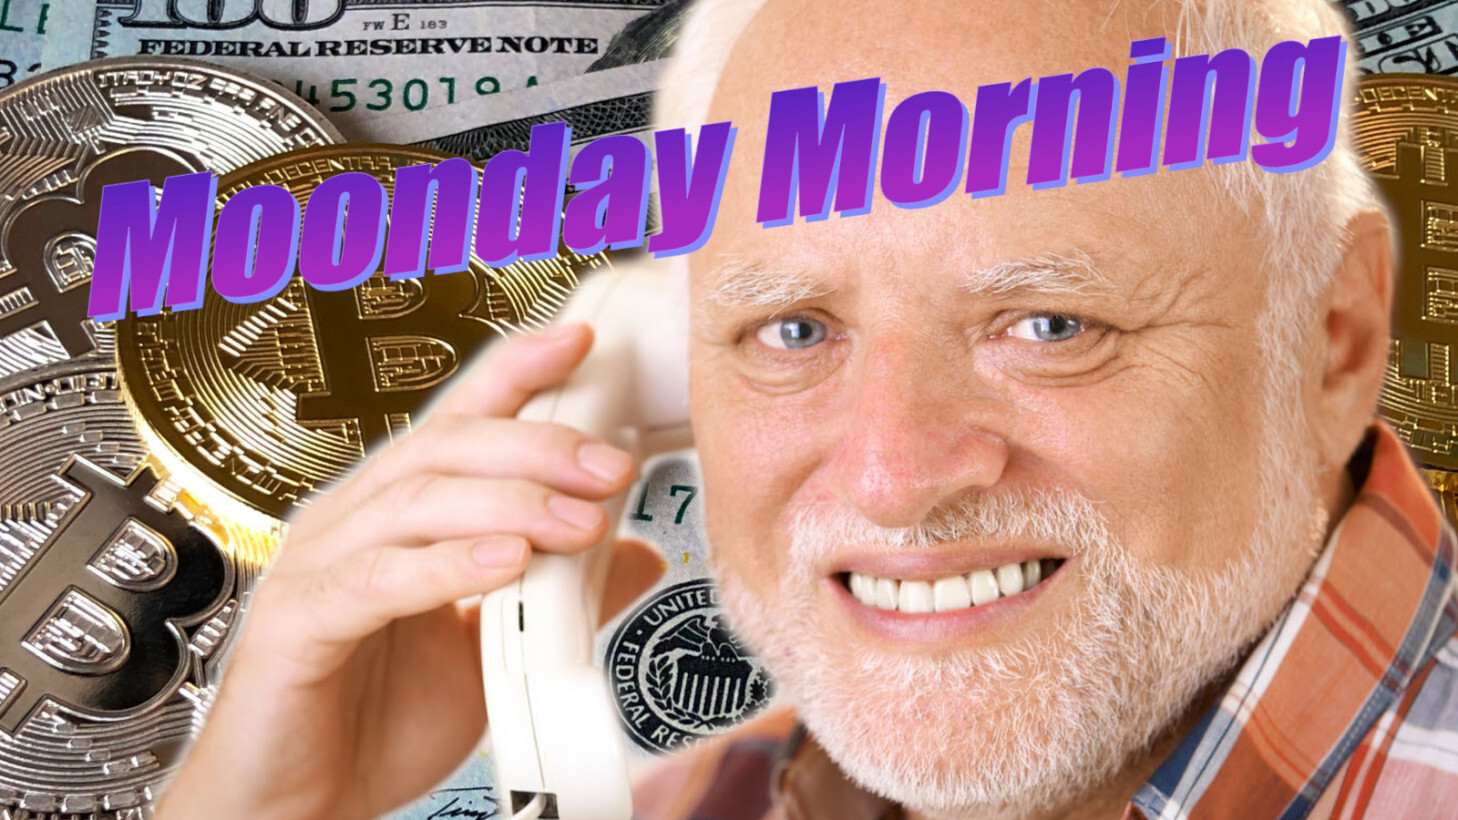 Moonday Mornings: Binance to resume deposits and withdrawals after $40M Bitcoin hack